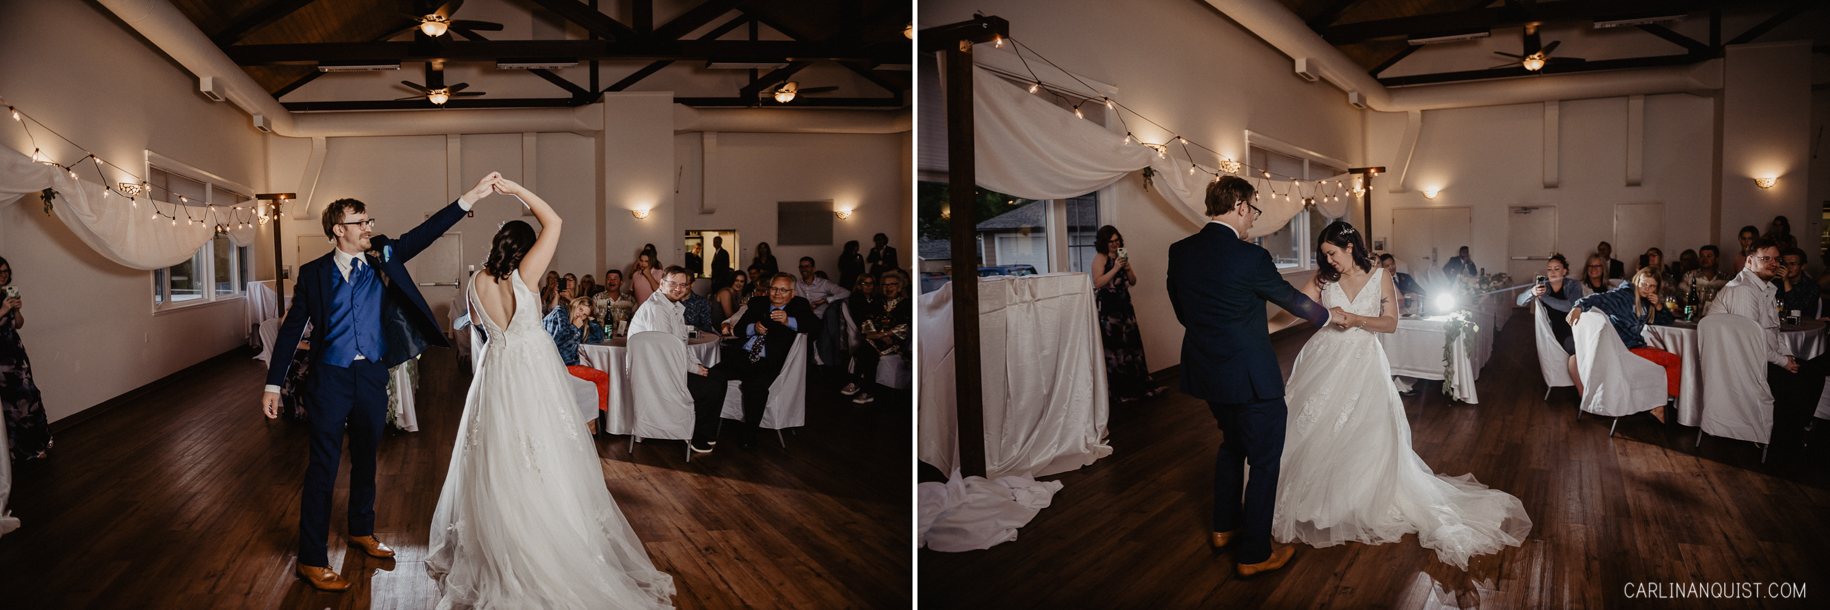 Bride & Groom Dance | Bowness Scout Hall Wedding